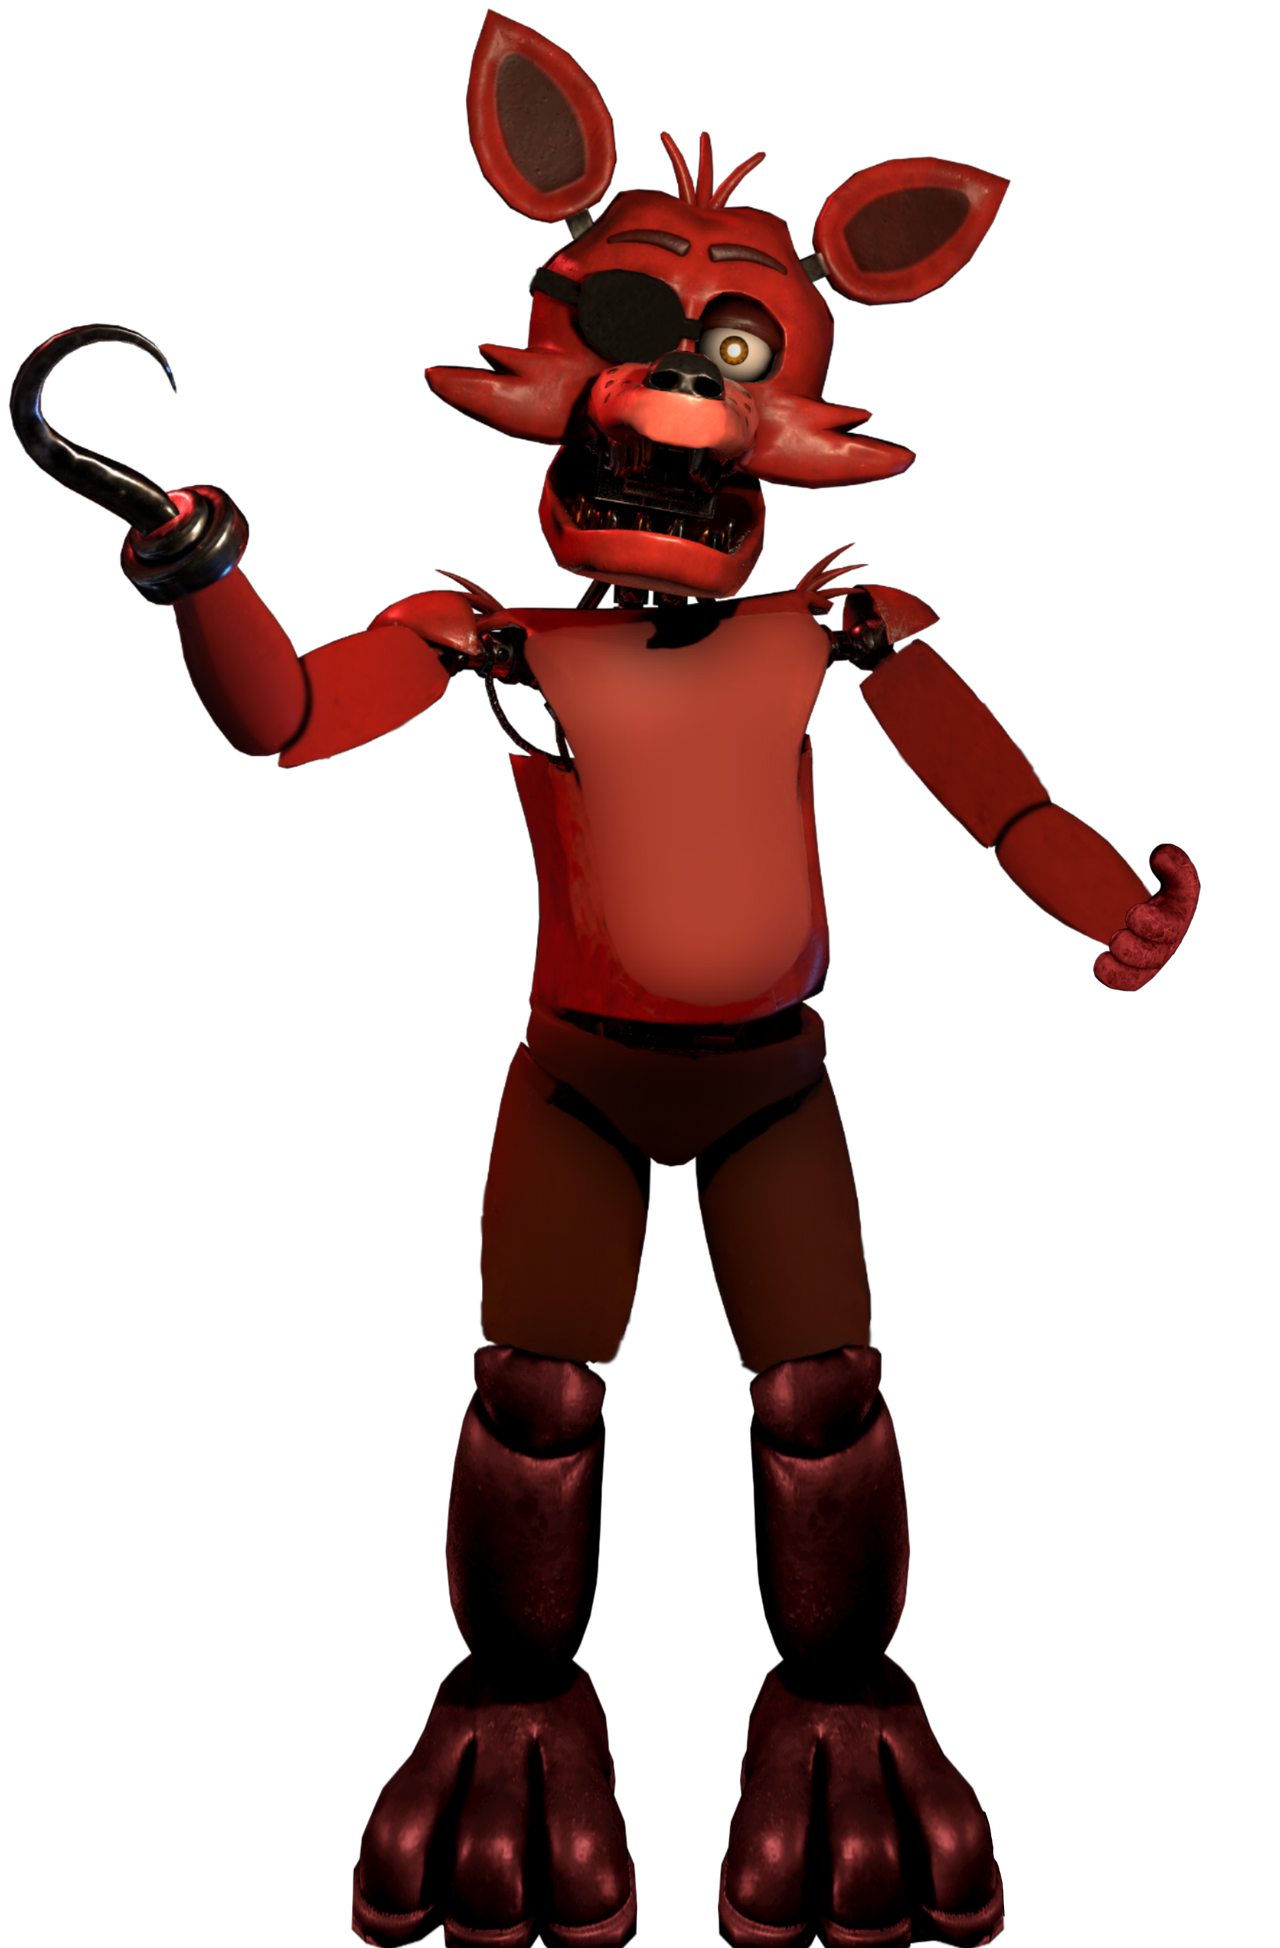 Fixed fnaf 1 foxy by sharptoothedits on DeviantArt